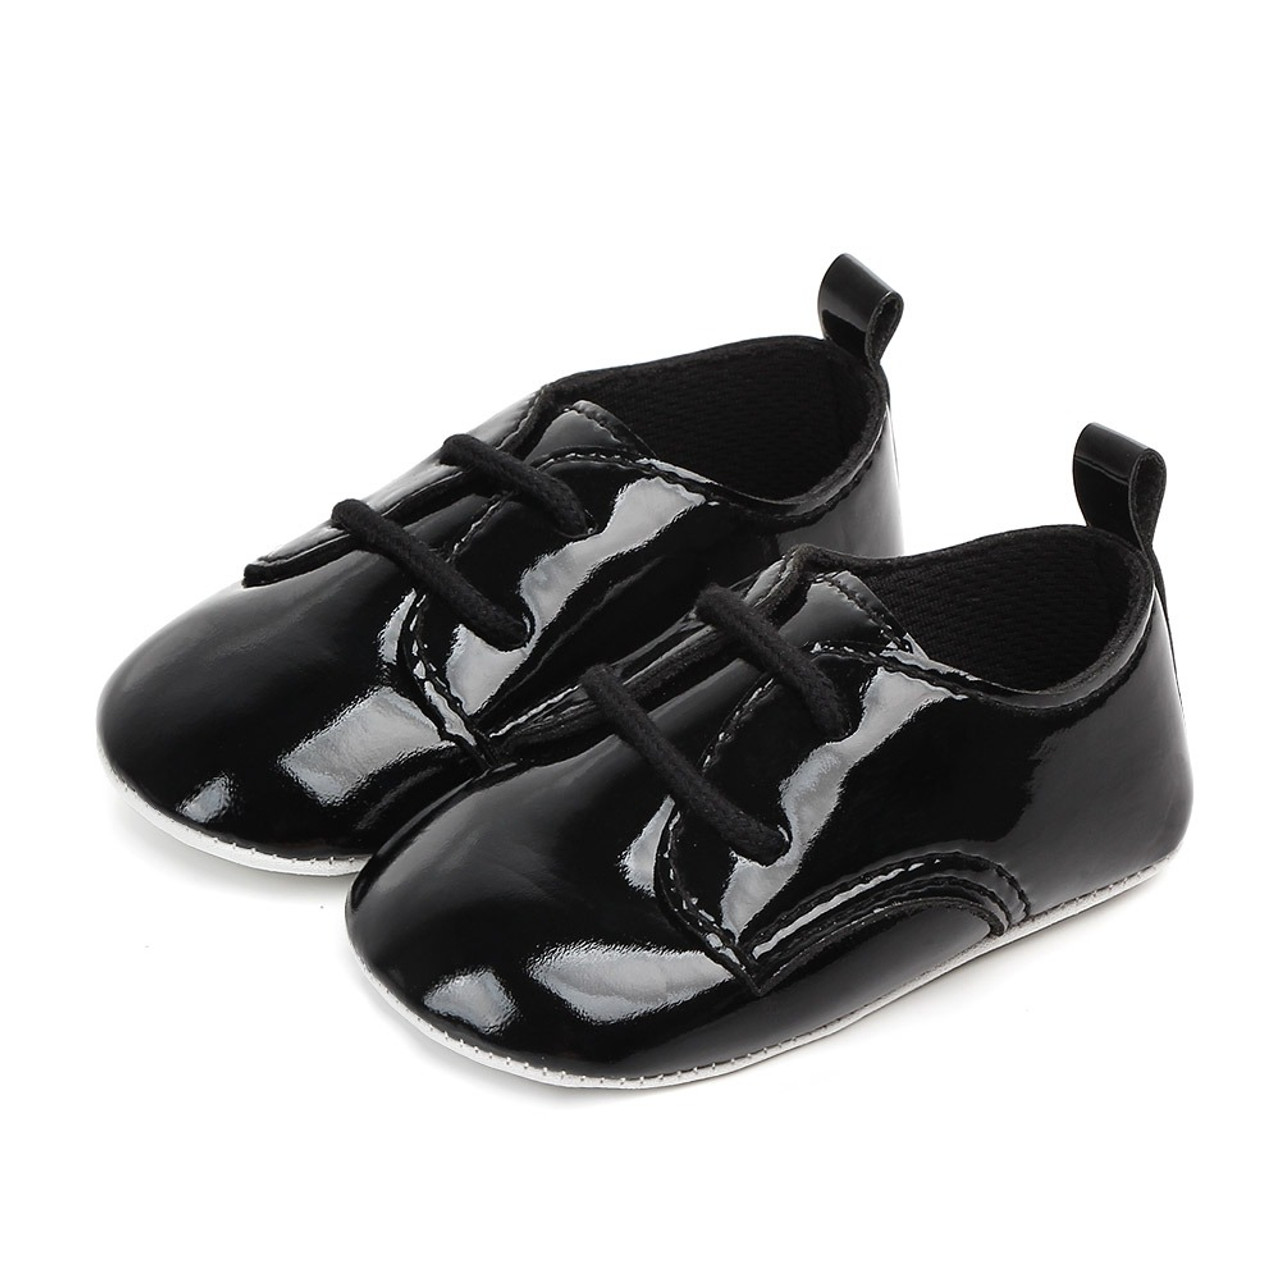 baby dress shoes